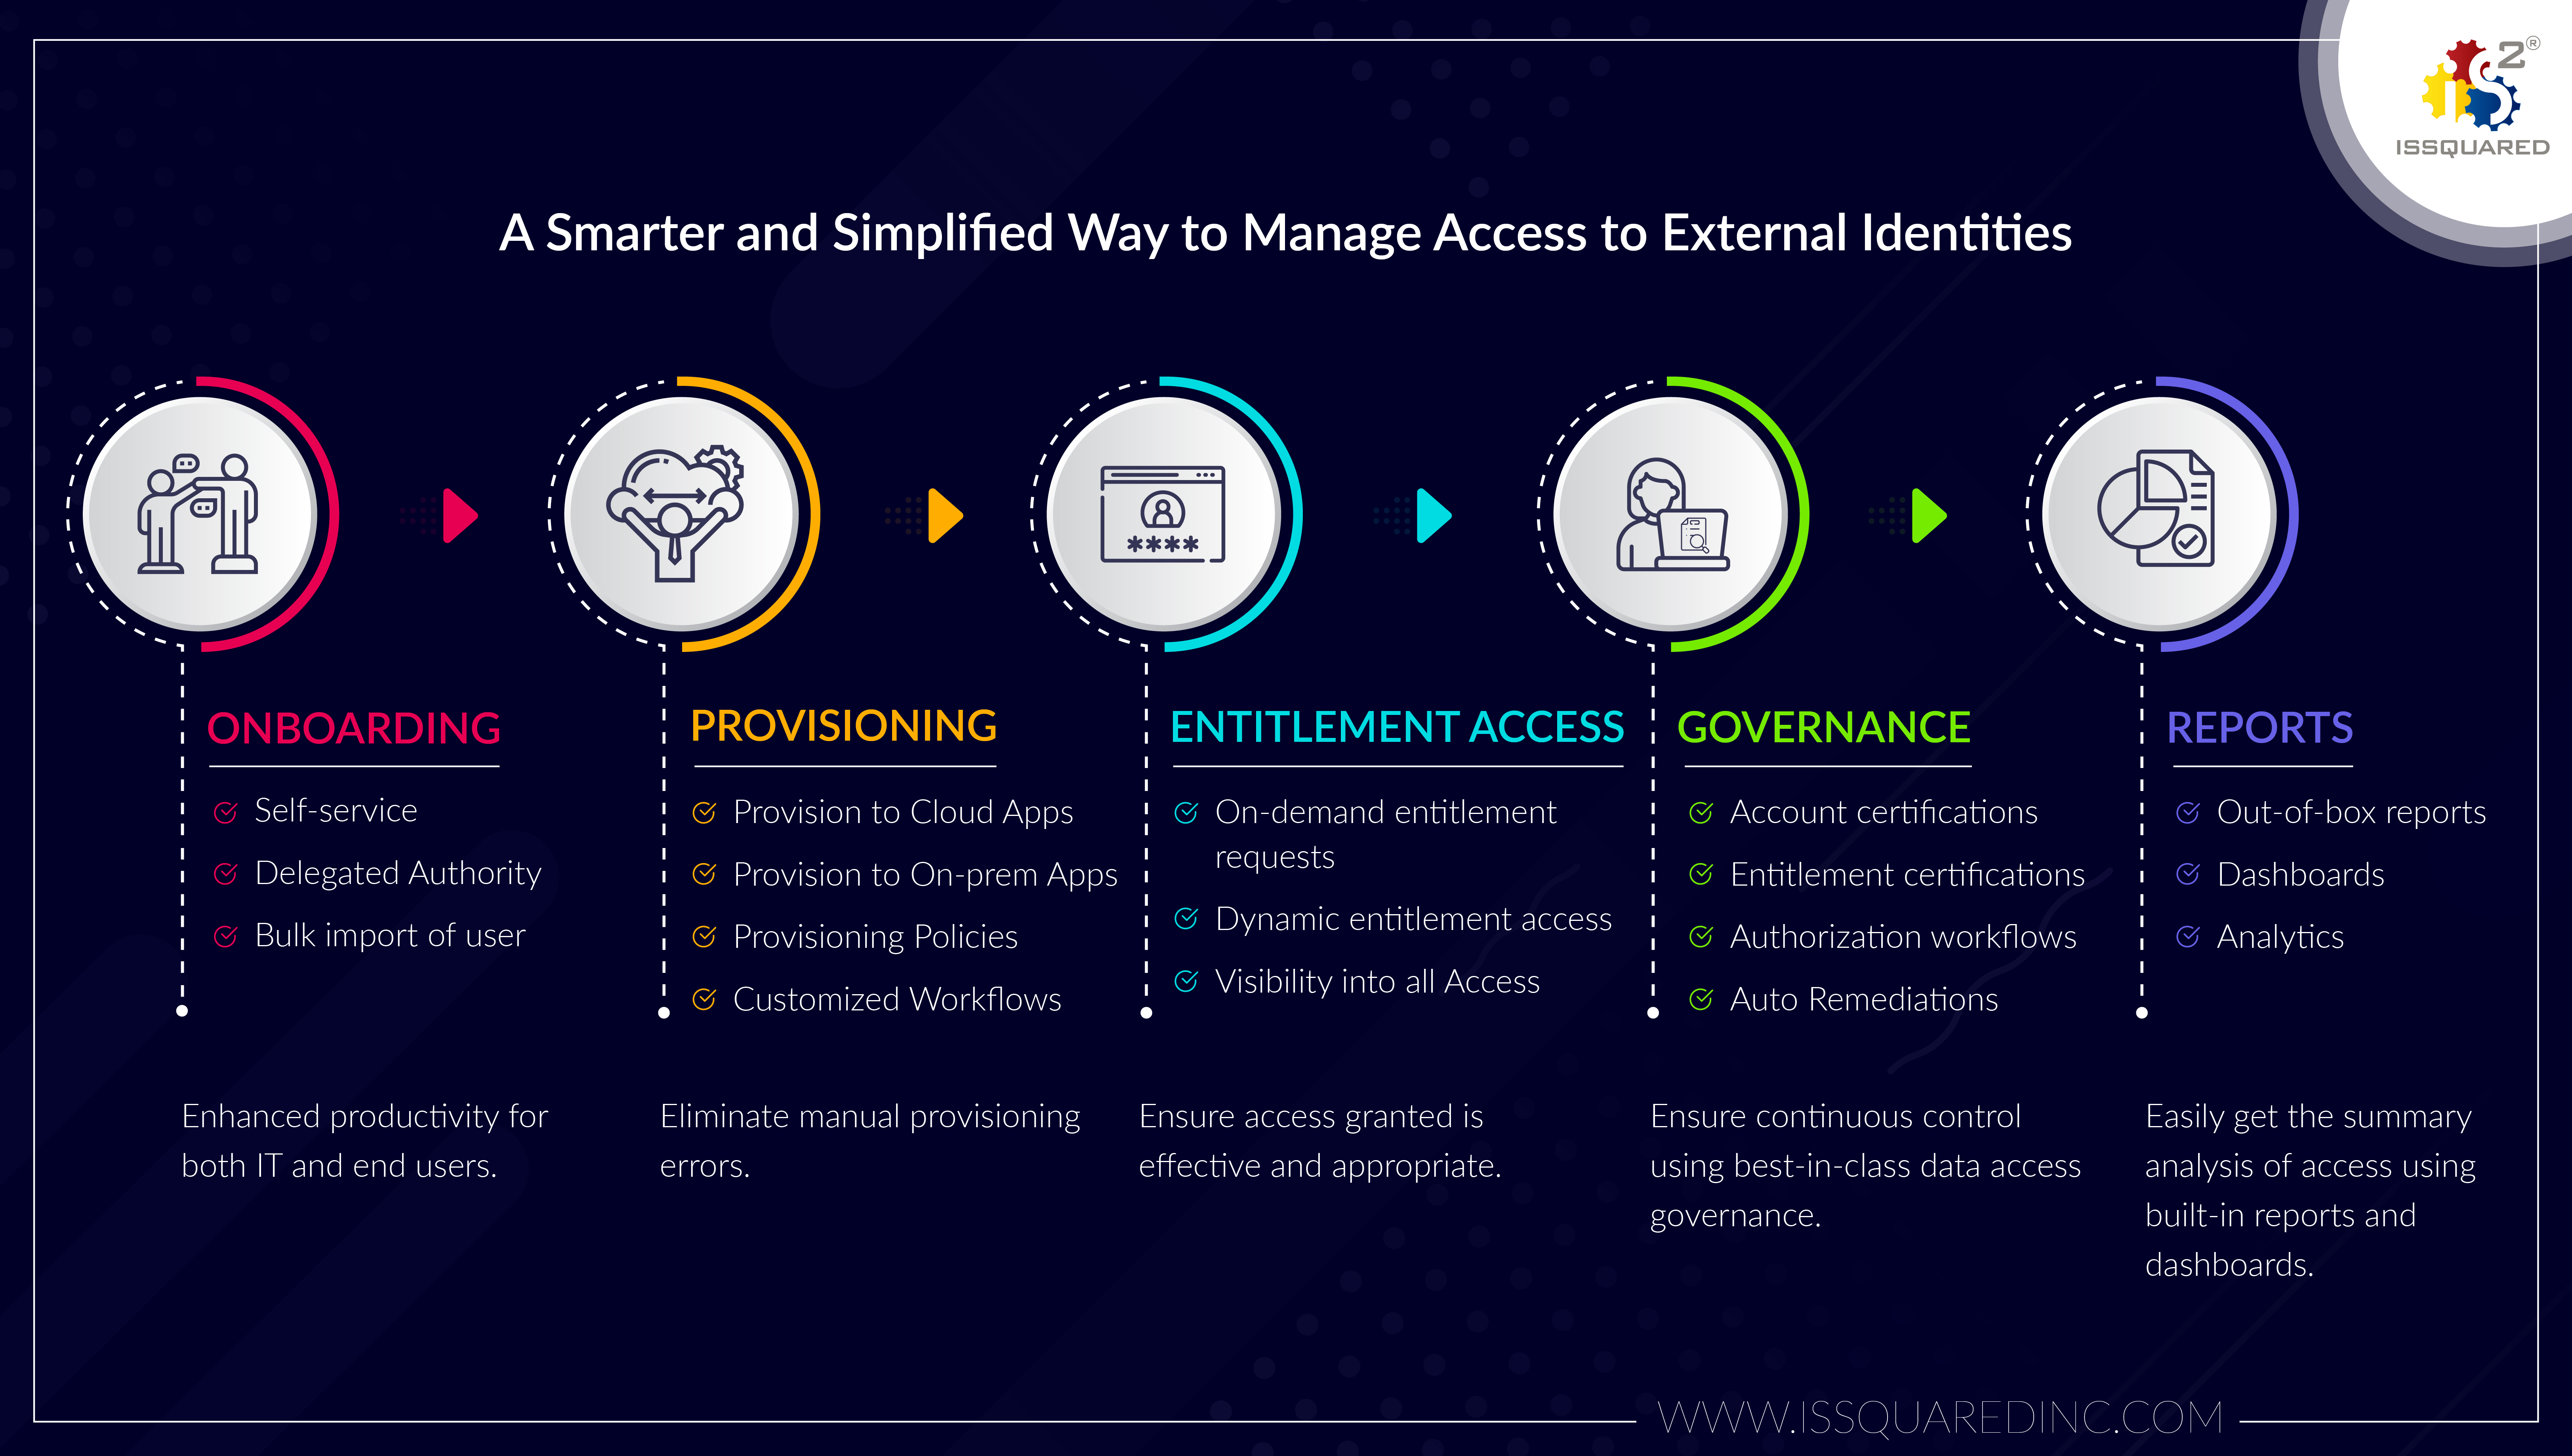 Key Benefits of ISSQUARED®’s
External Identity Access and Governance (EIAG)